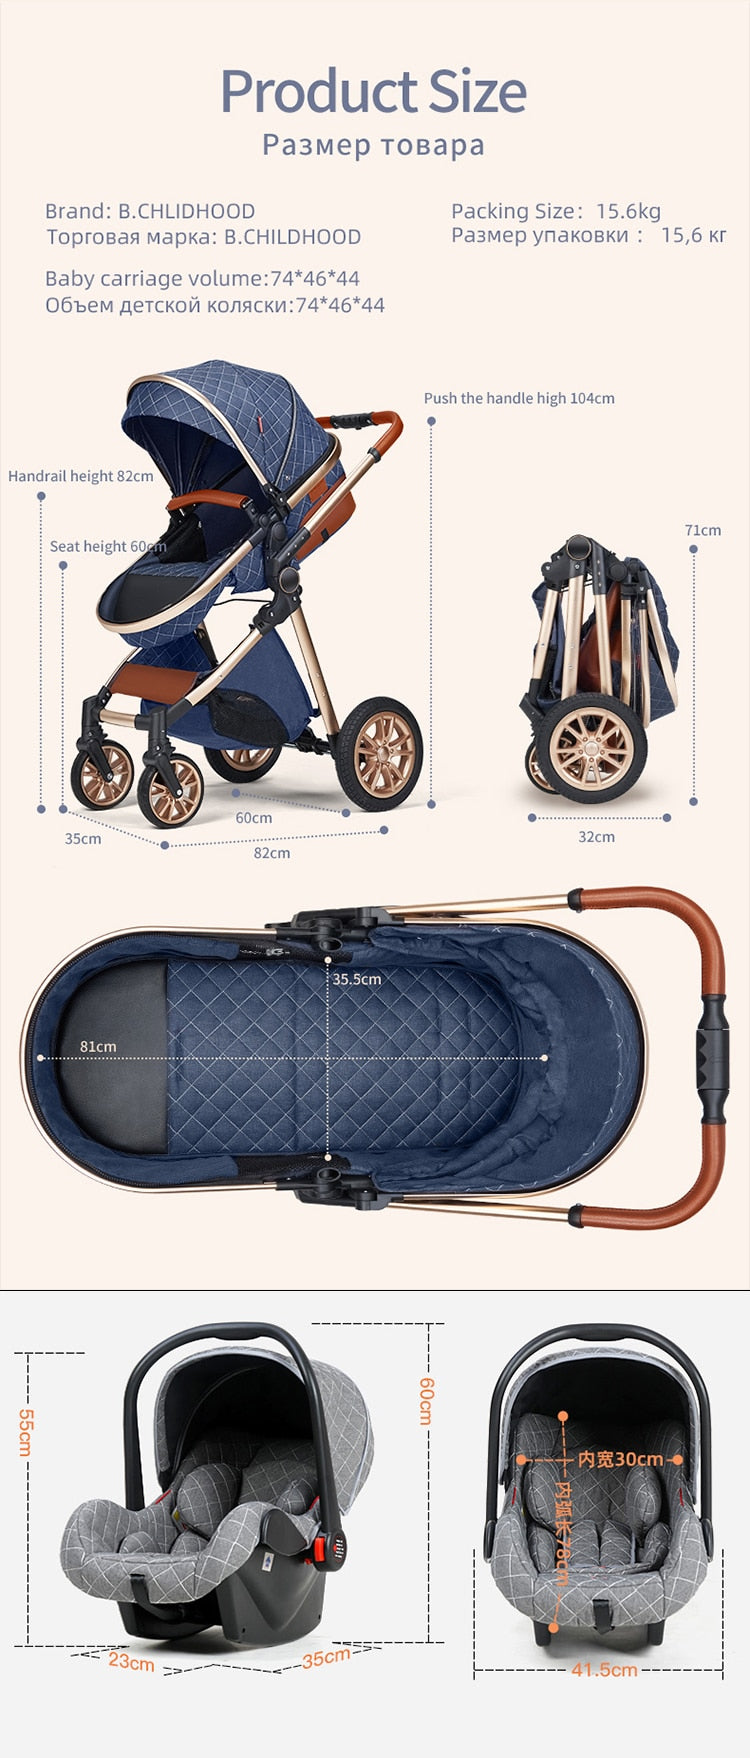 Luxury Leather High Landscape Baby Car: Fashion 3 in 1 Folding Prams Portable Travel Baby Stroller Carriage